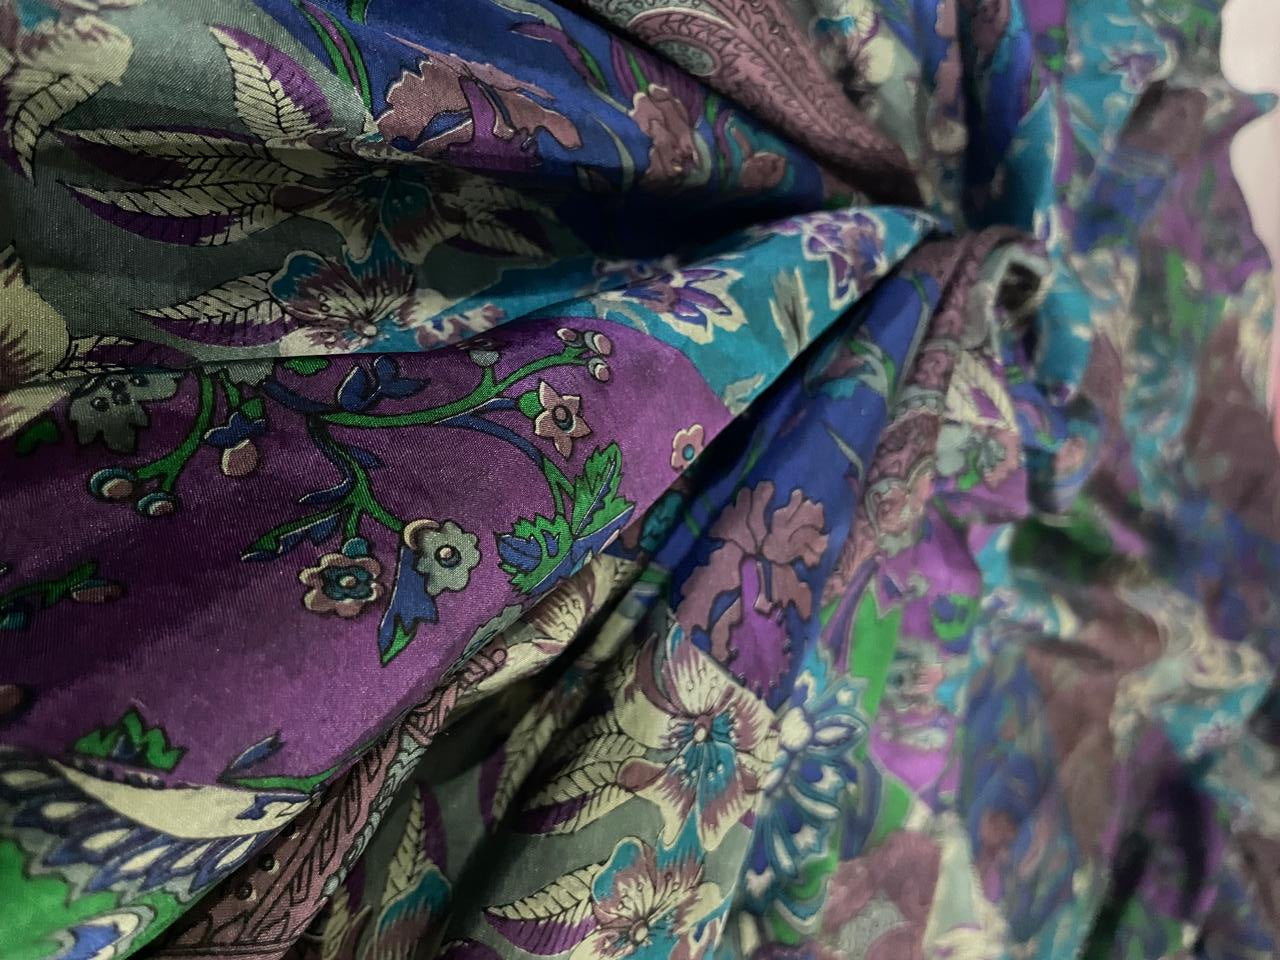 Pure silk HABOTAI FLORAL PRINT 80 gms [15940] LAST 1 METER ONLY